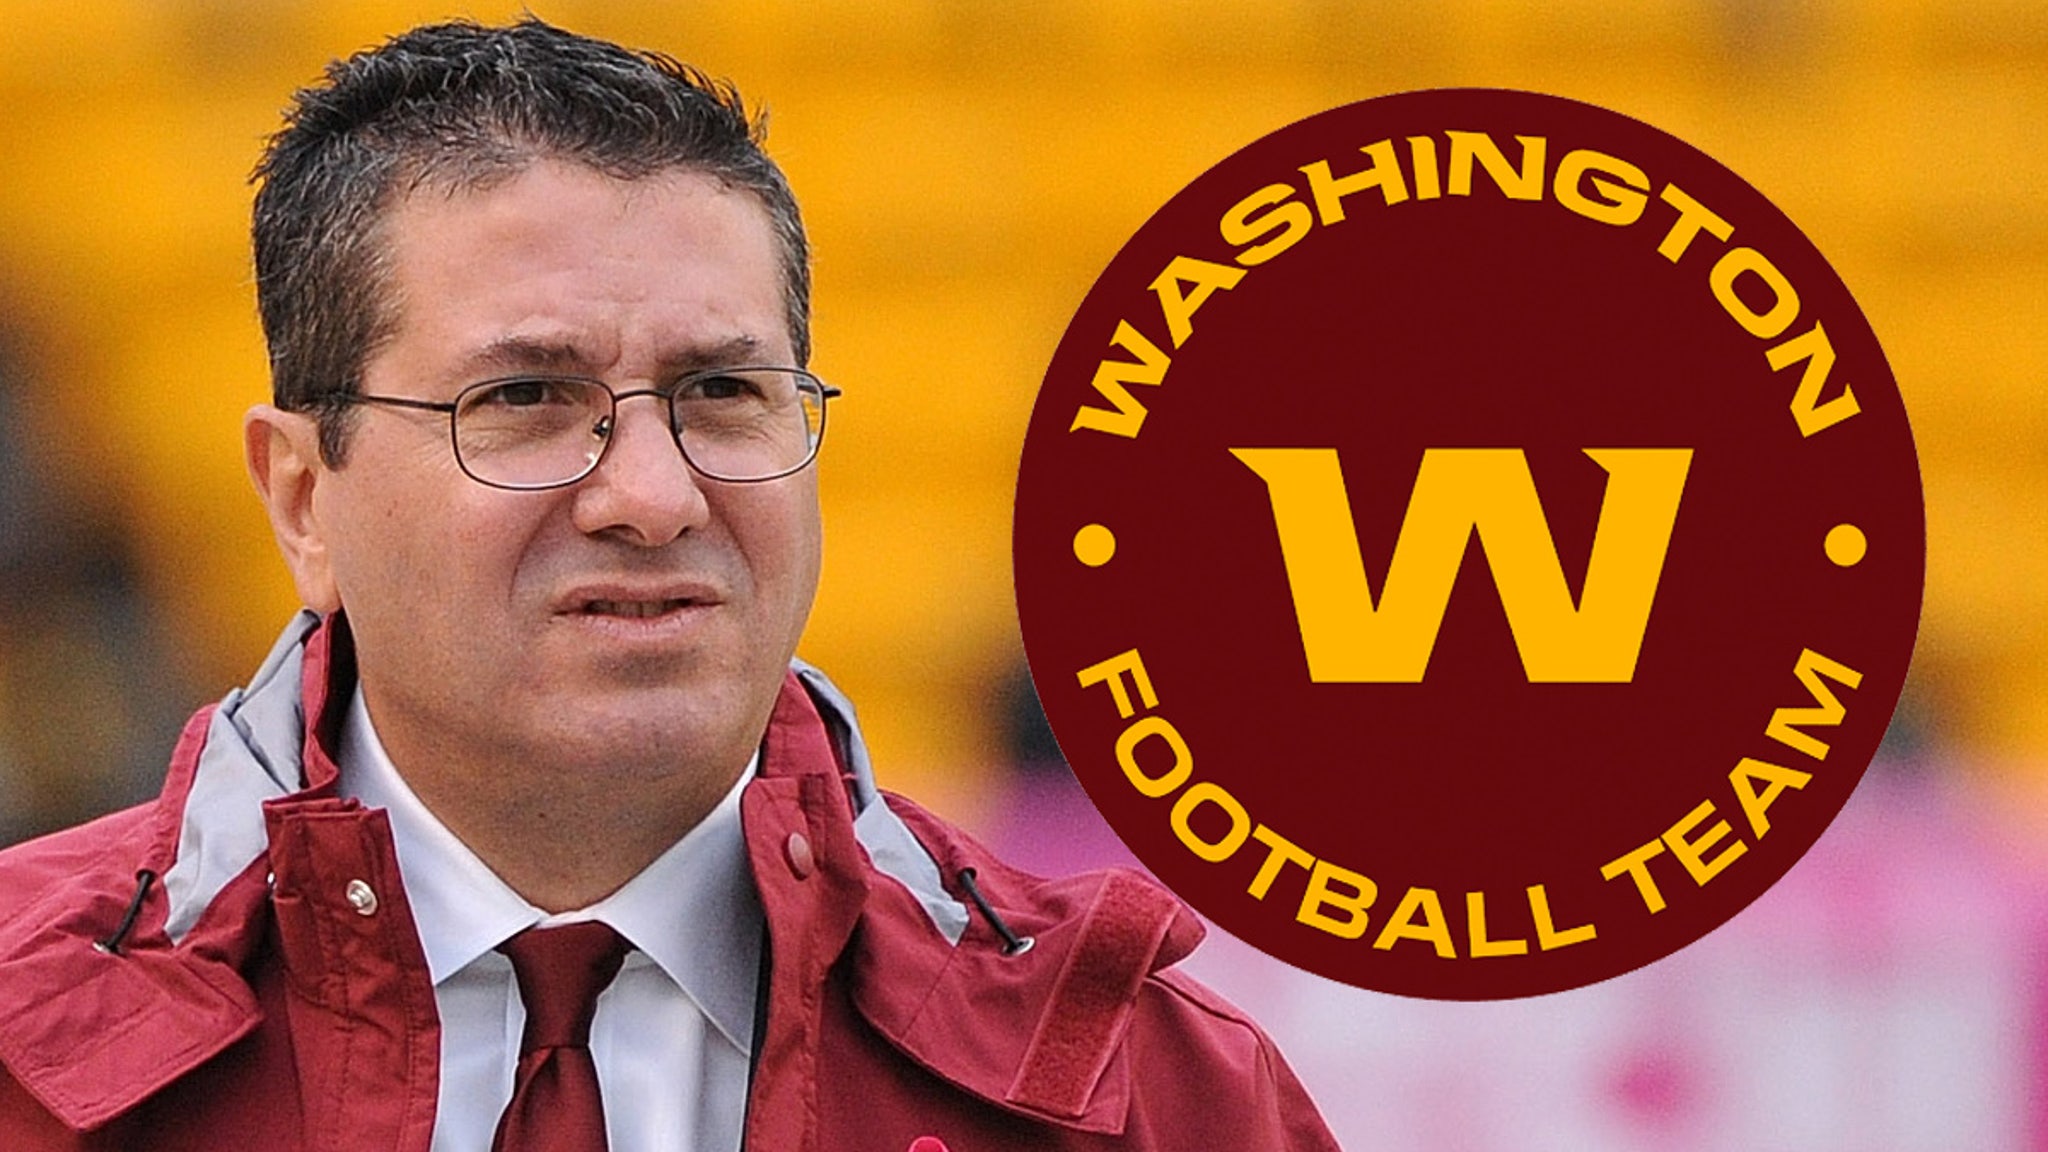 Dan Snyder accuses co-owner of extortion to force sale of Washington football team